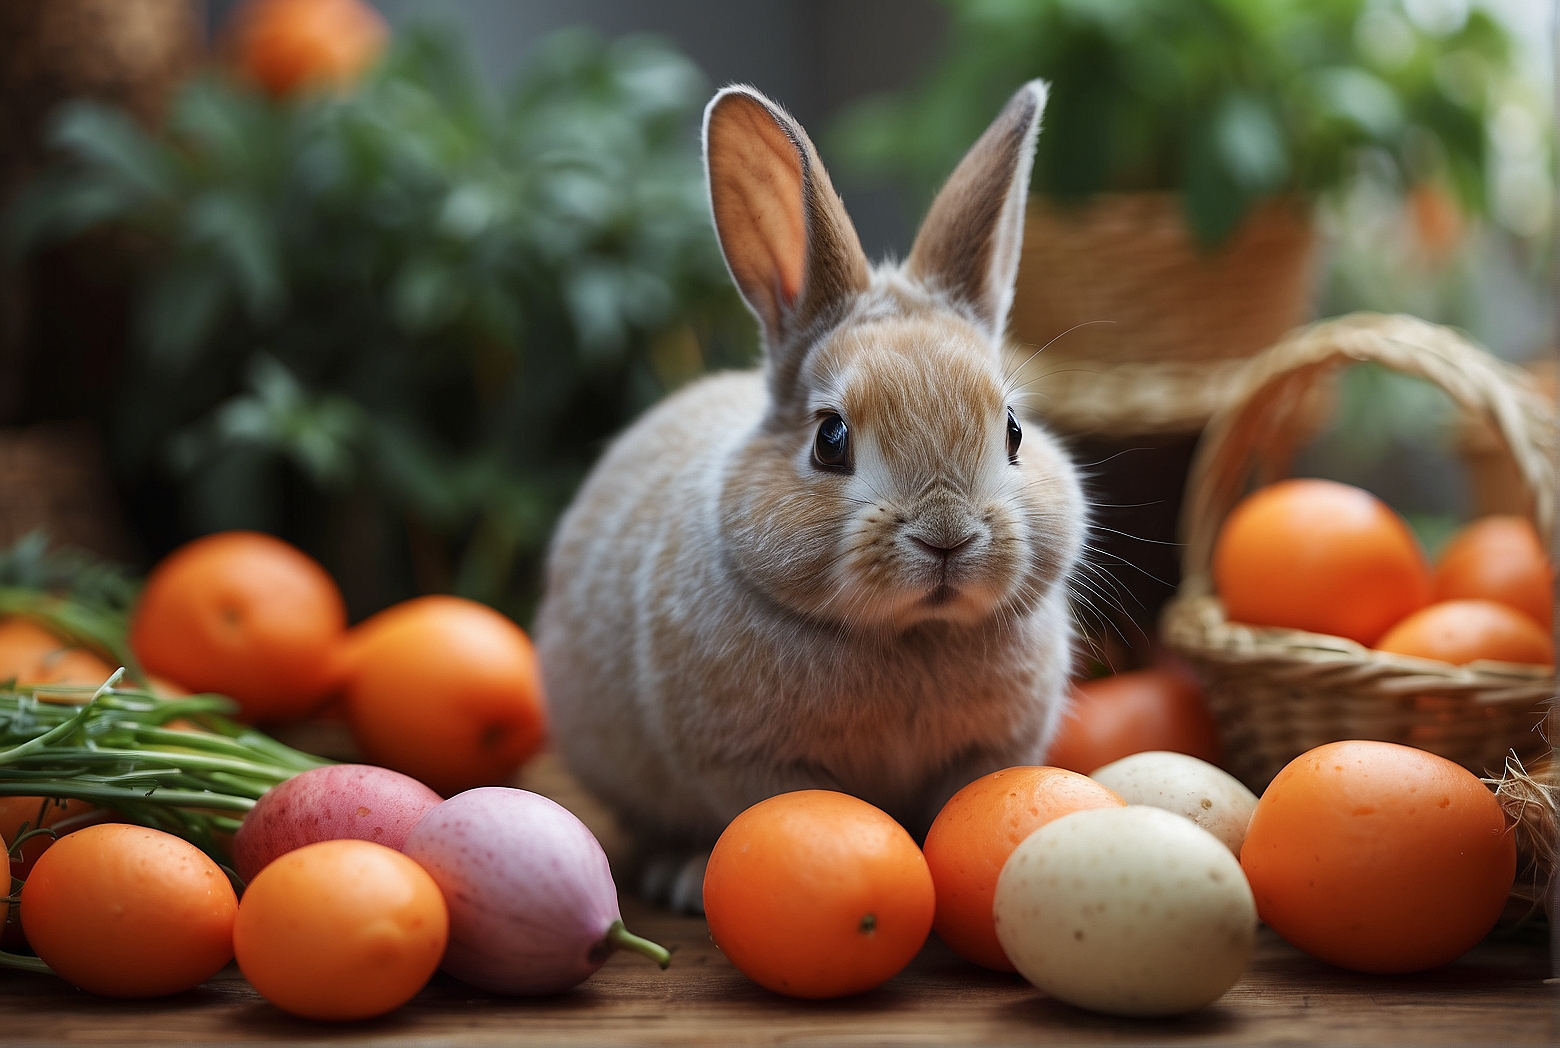 Foods to Avoid for Netherland Dwarf Rabbits